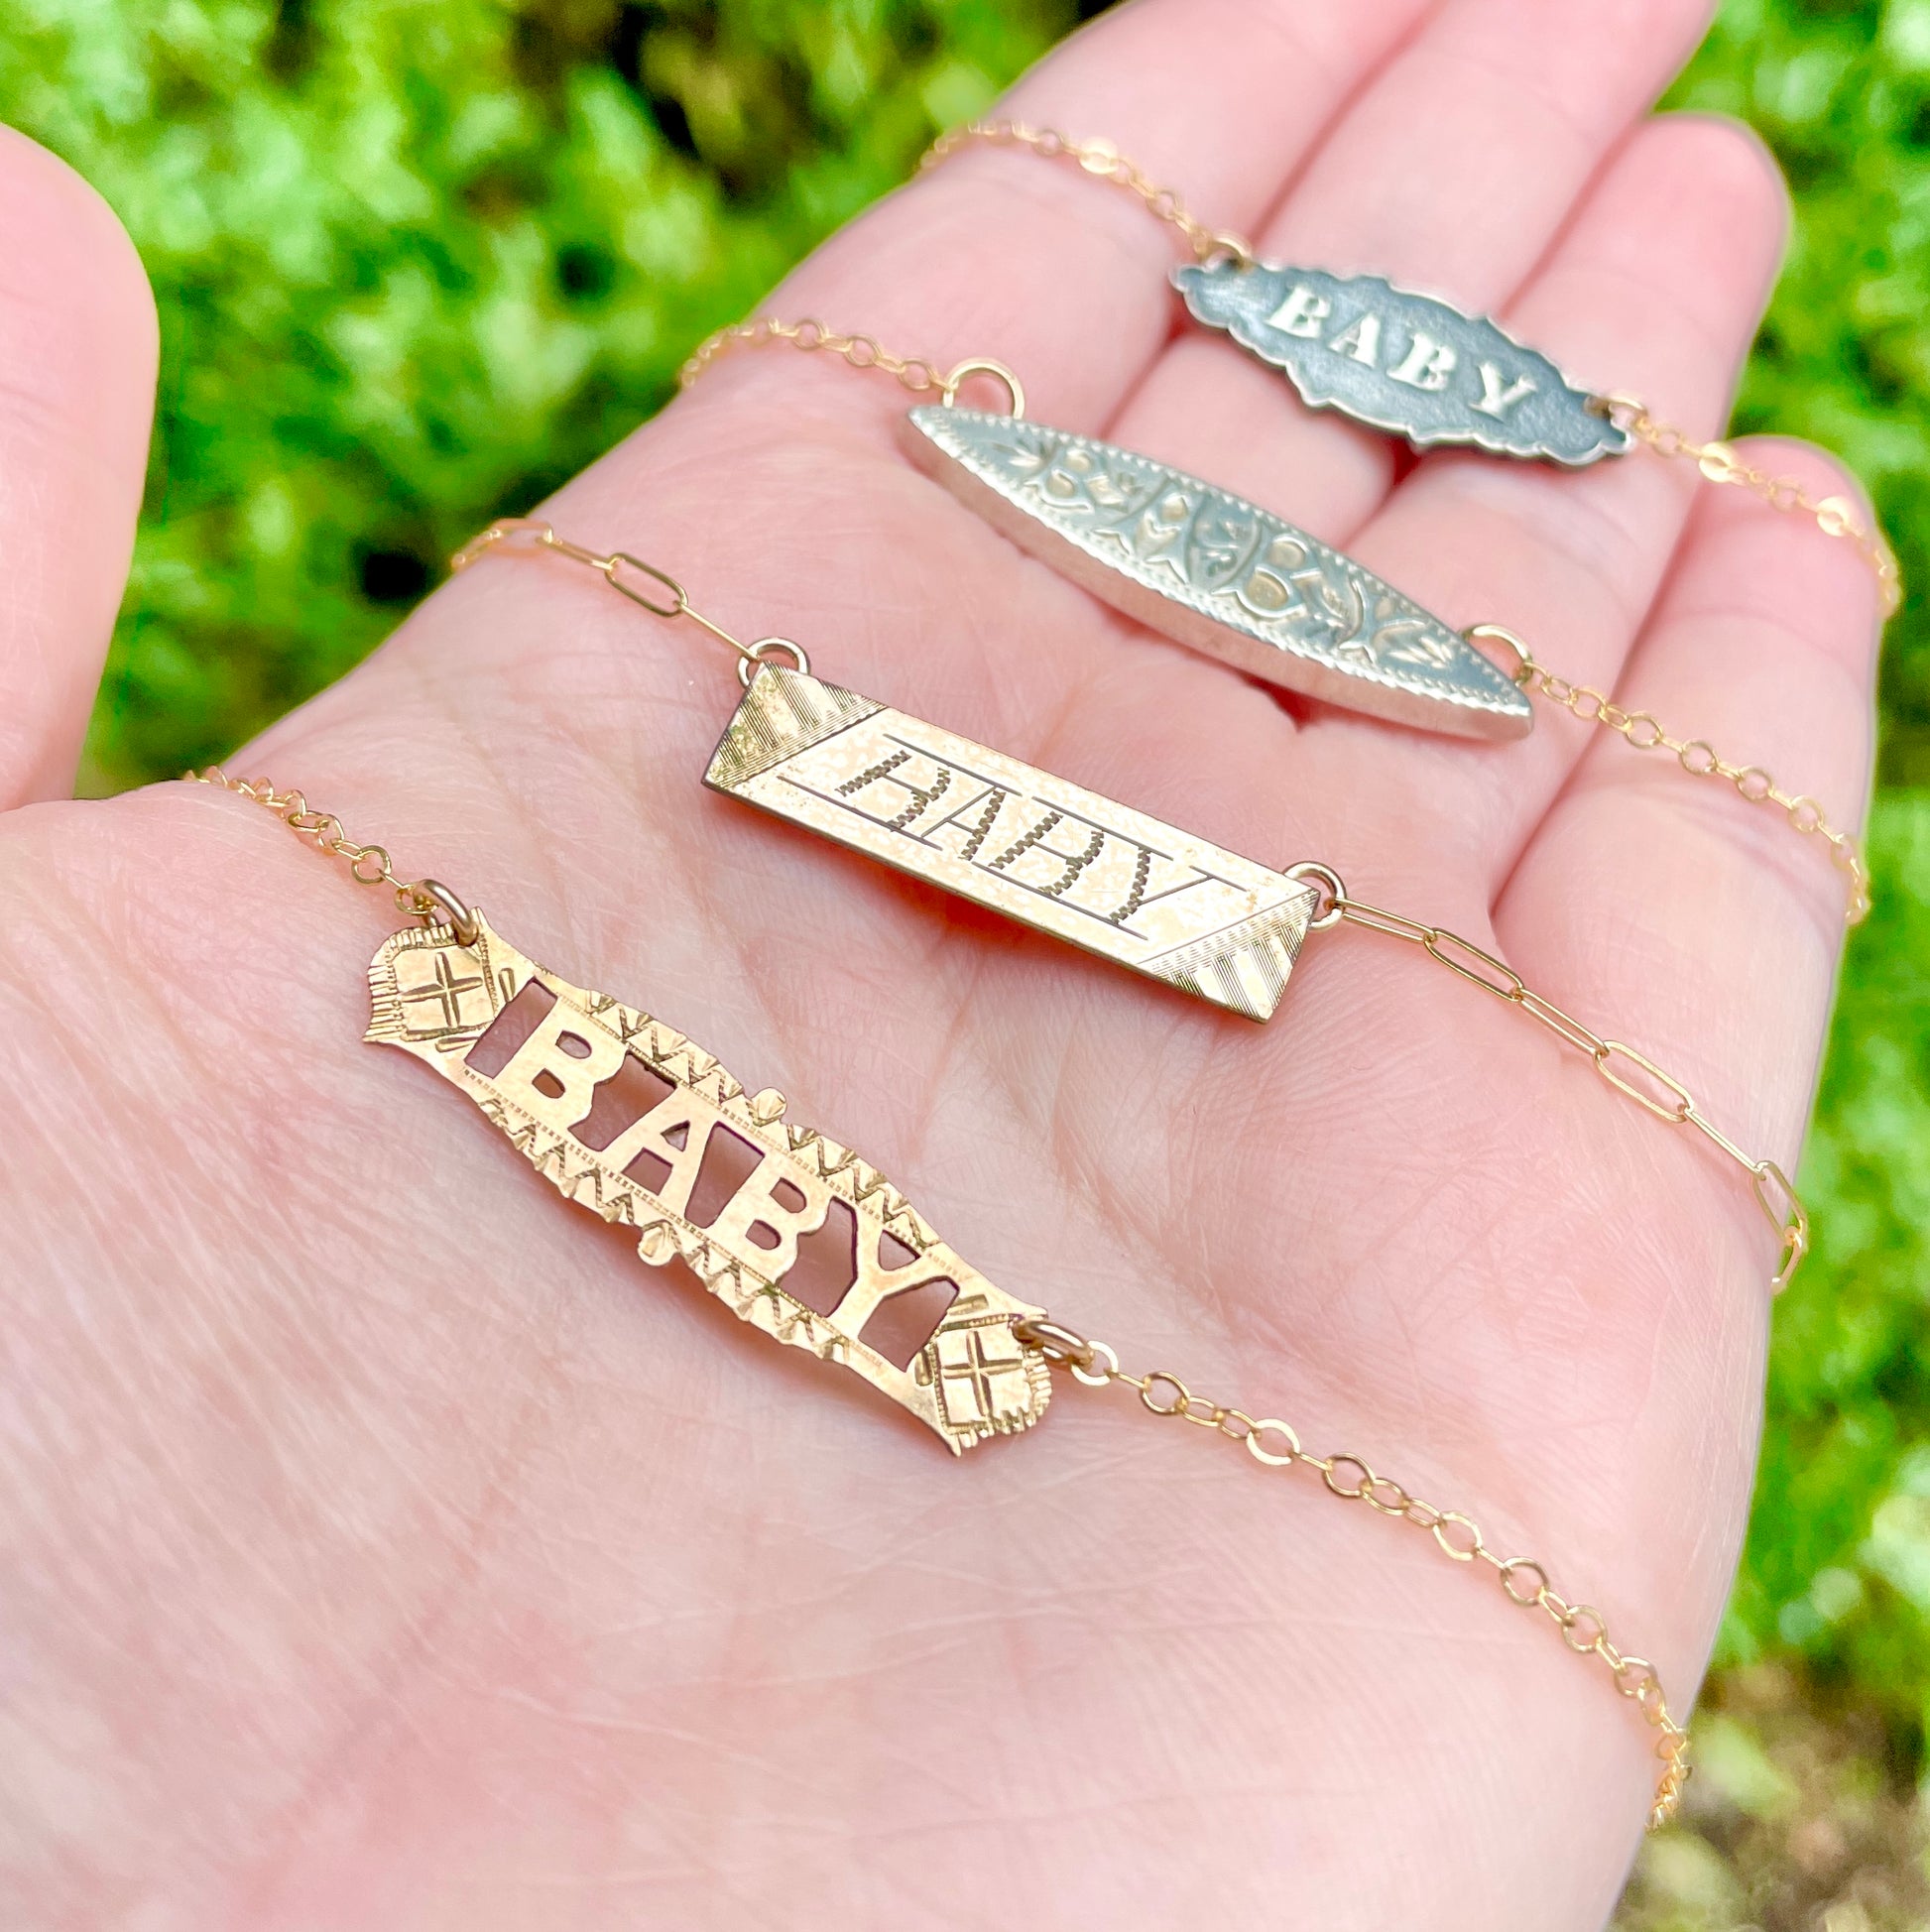 Four bar pin and brooch conversion necklaces in gold filled and fine silver, each depicting the word BABY. Necklace are shown on the palm side of the left hand with greenery in the background.